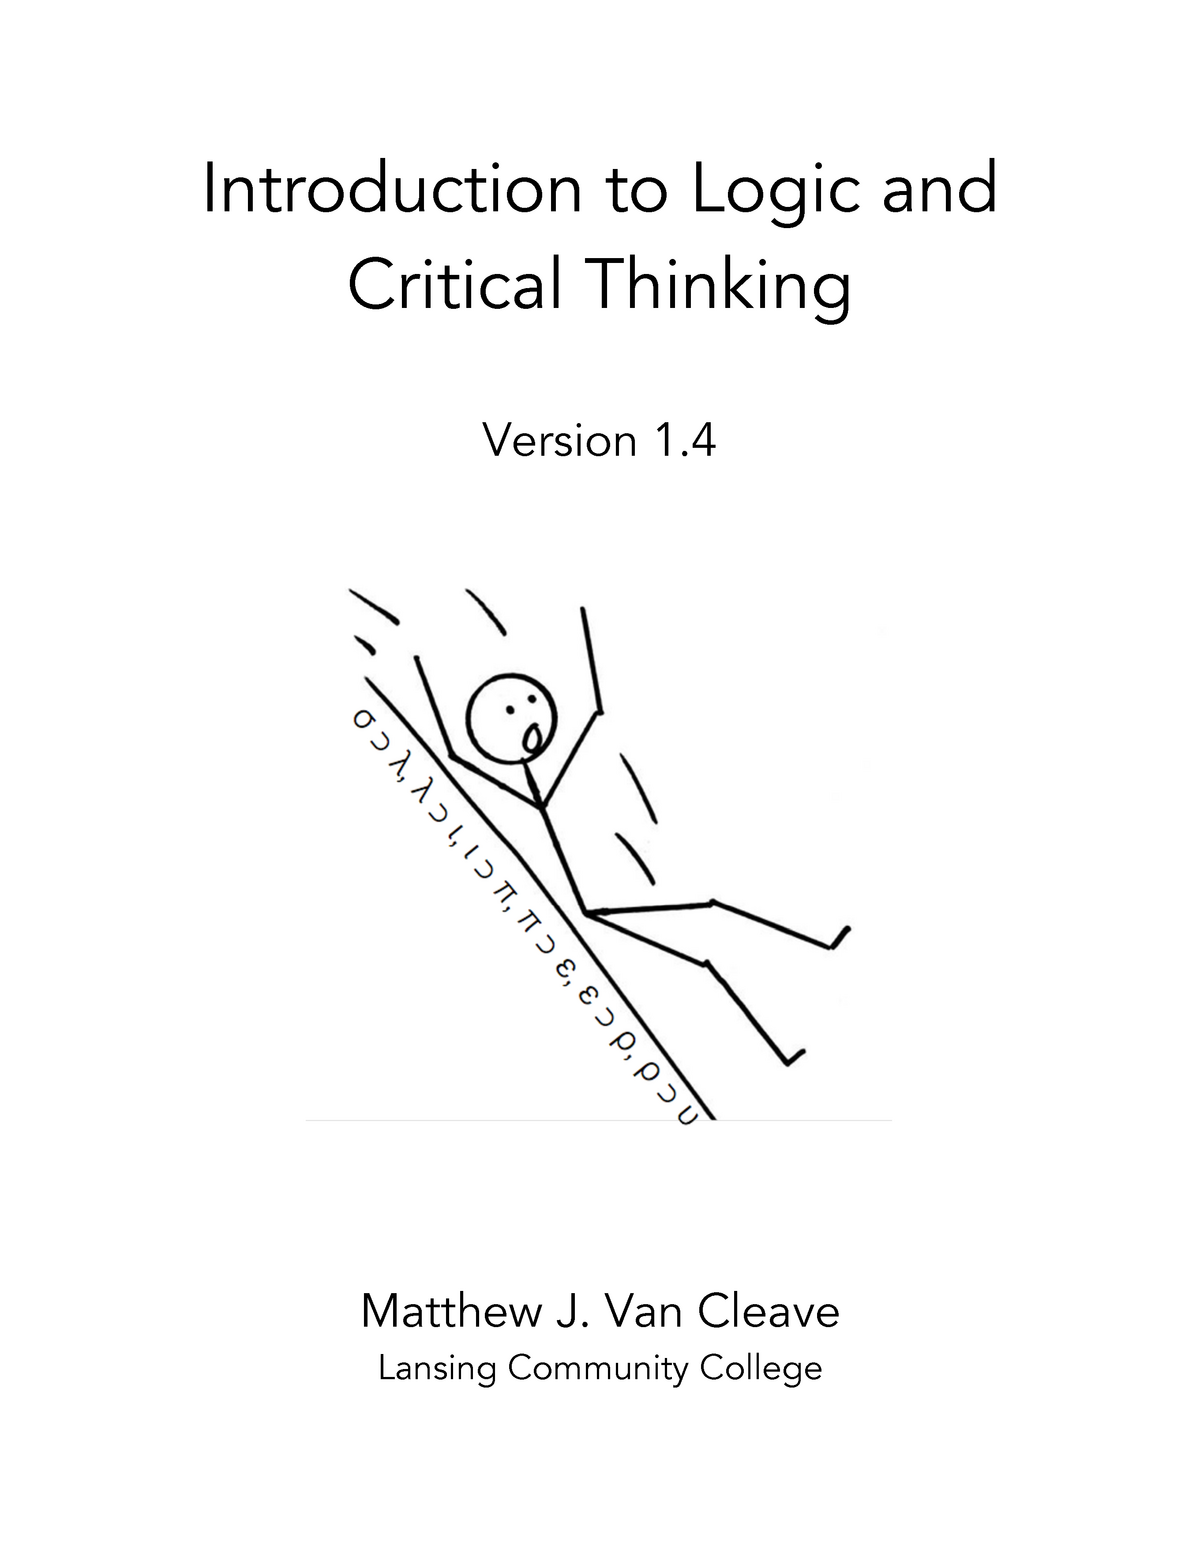 introduction to logic and critical thinking answers